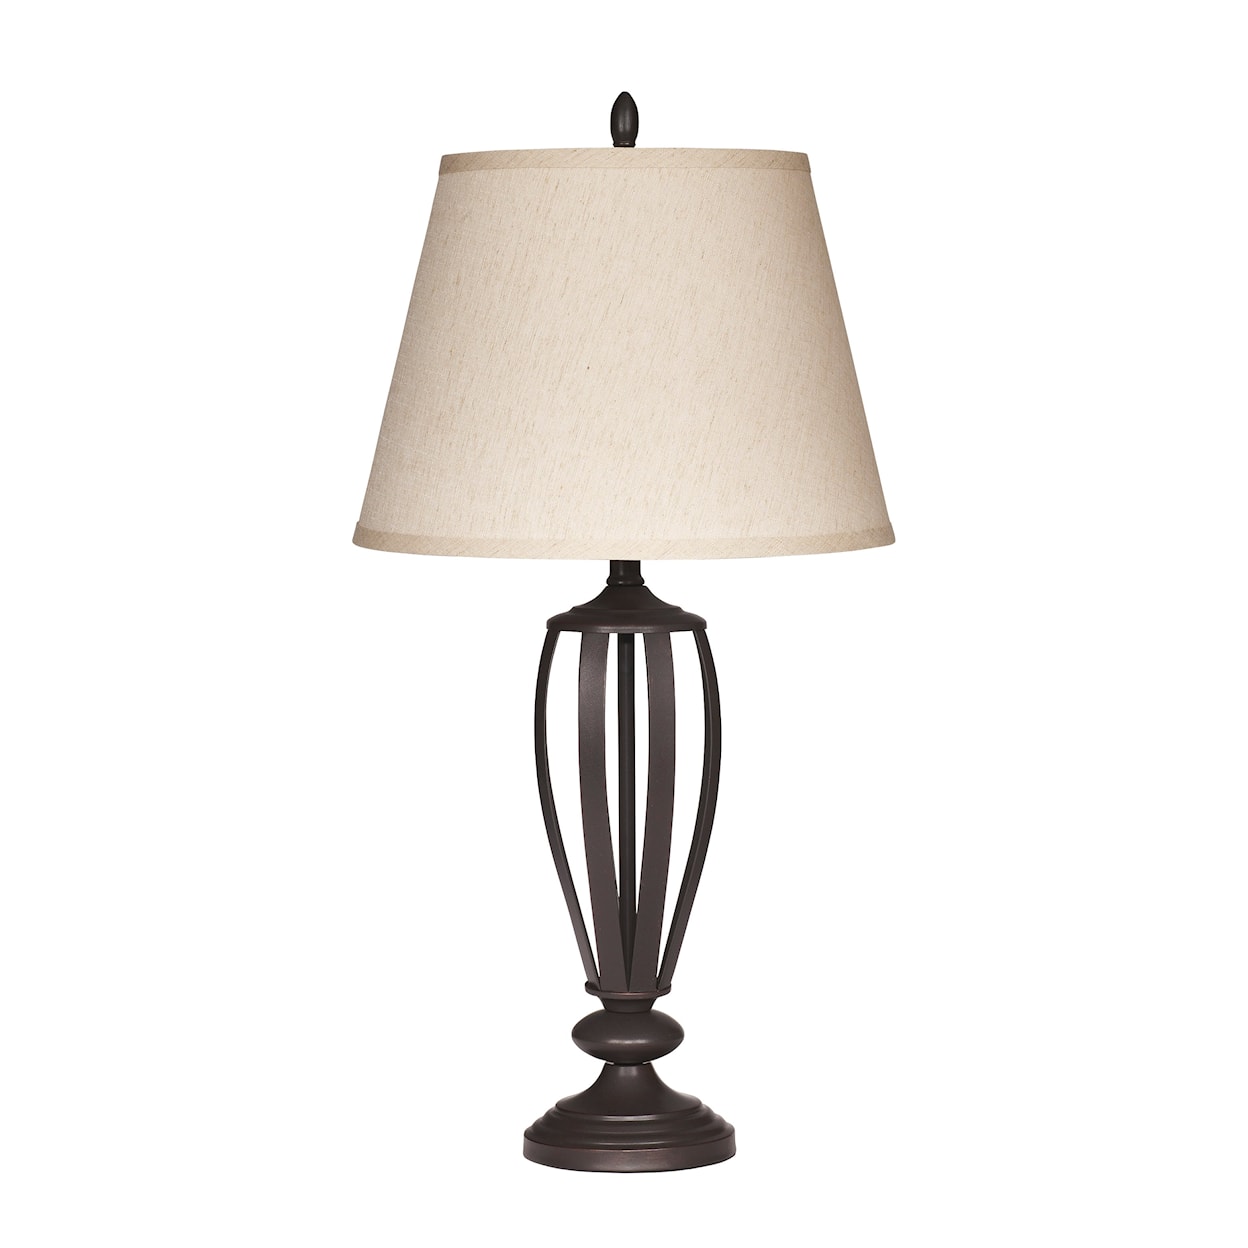 Sam's Furniture Ashley Lamps Mildred Table Lamp